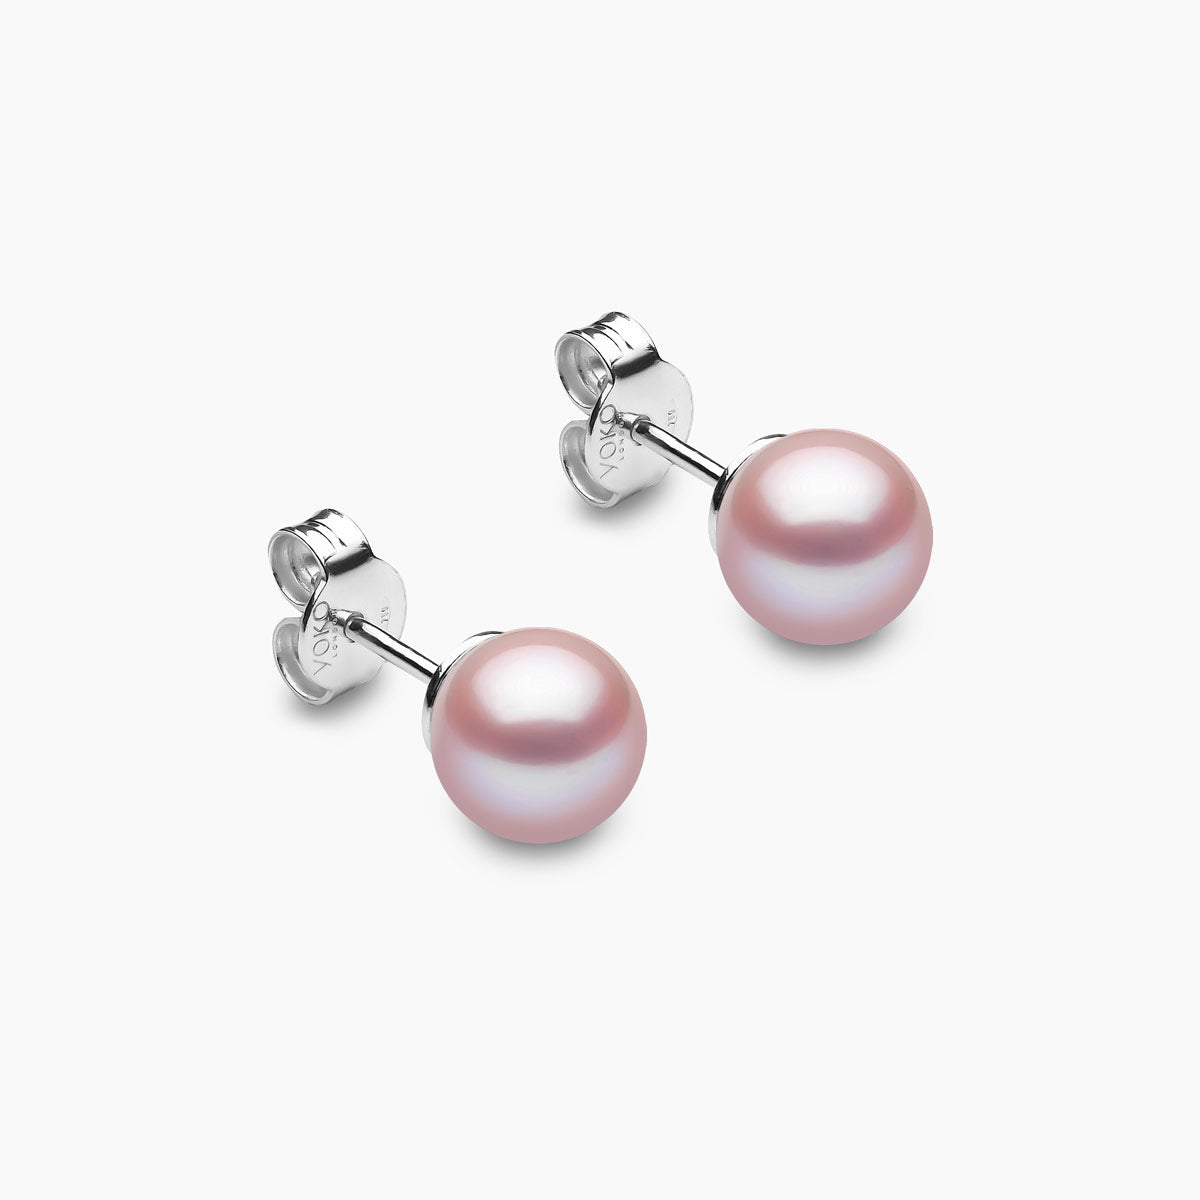 White Gold / Pink Freshwater / 7mm